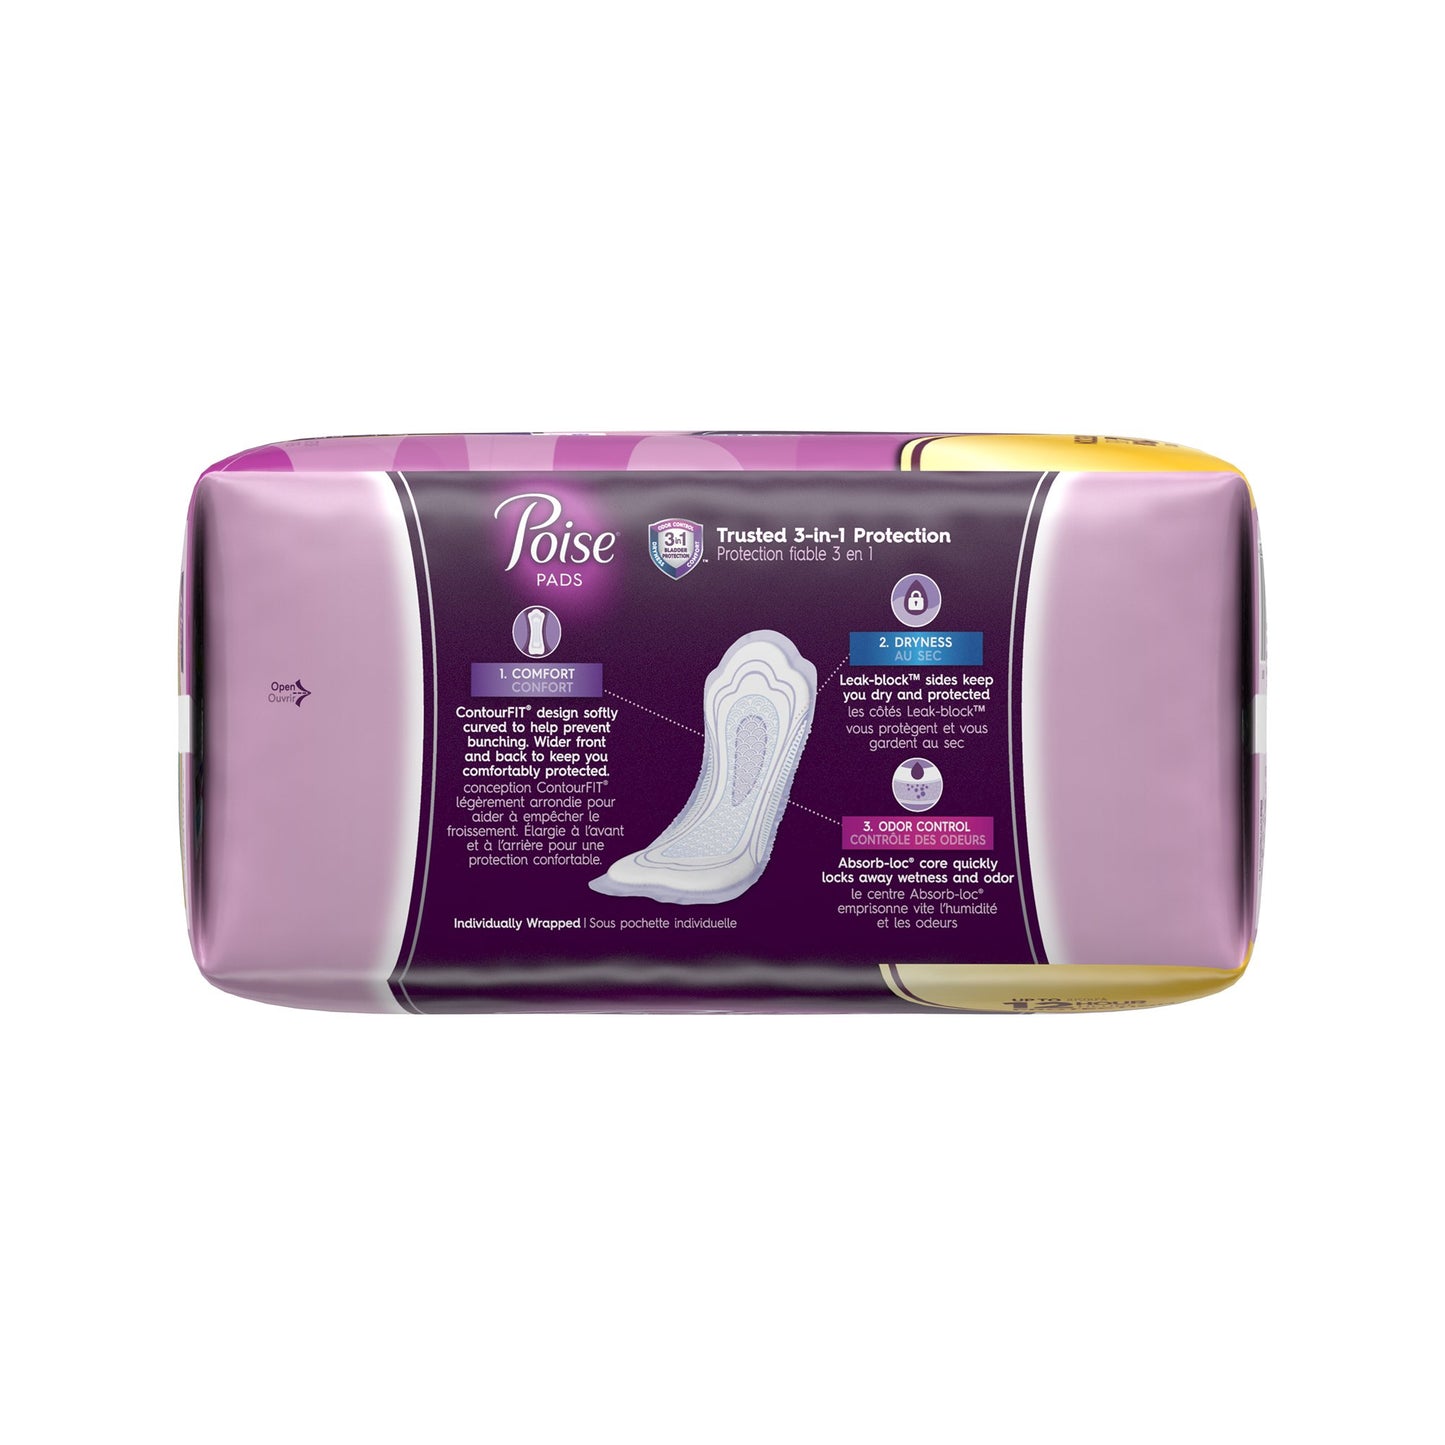 Poise Bladder Control Pads, Heavy Absorbency, 33 ct